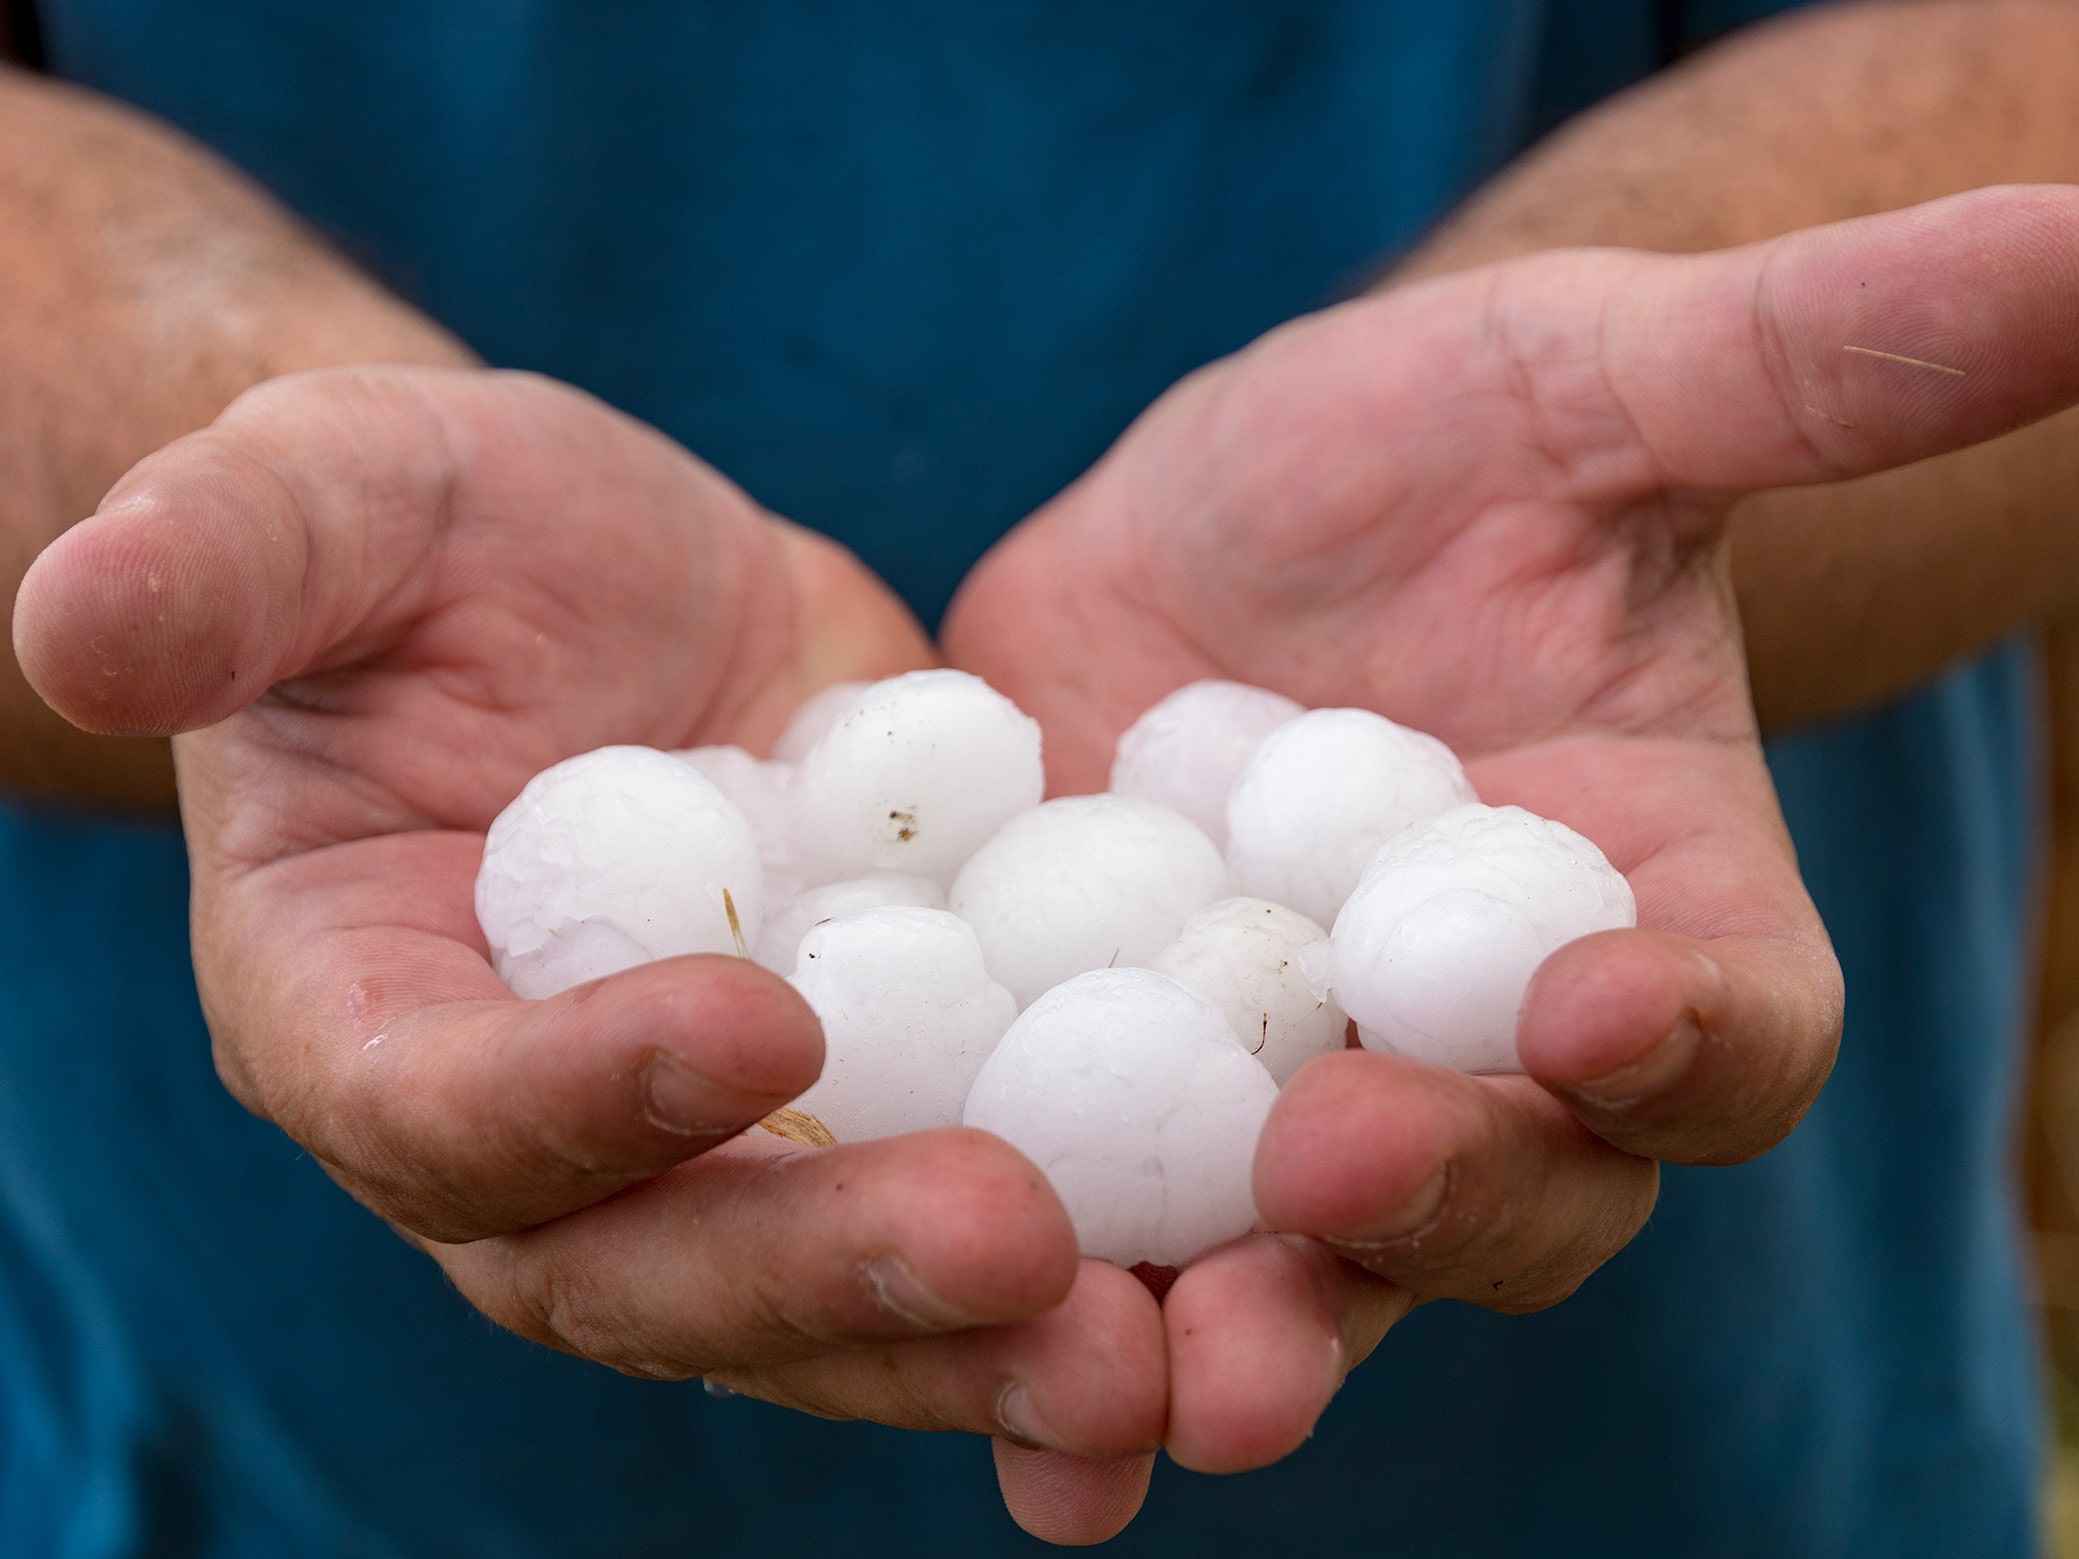 Hands hold many large hailstones